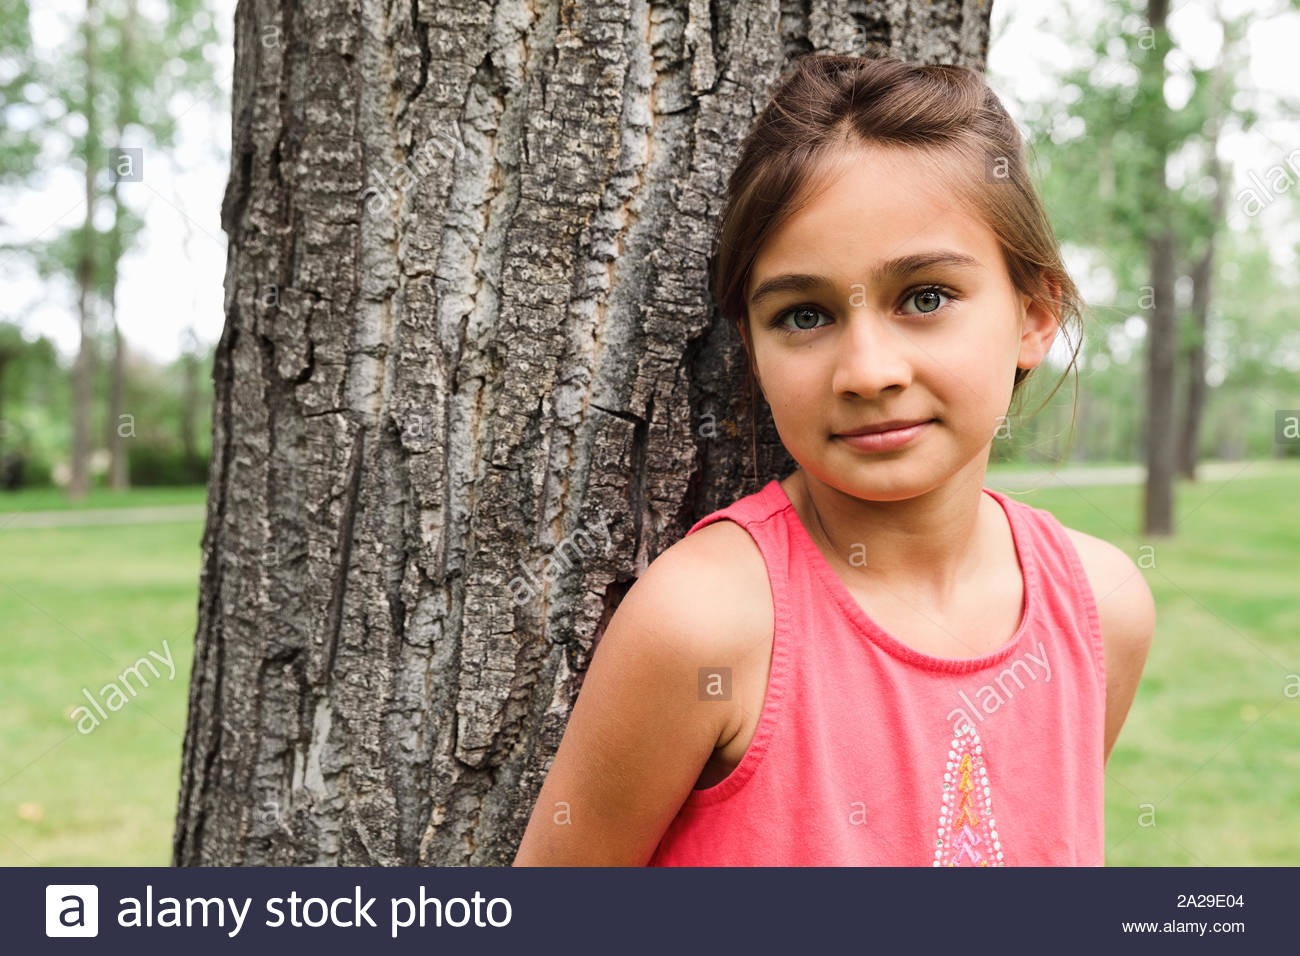 Portrait of young girl leaning against tree and looking at camera Stock Photo